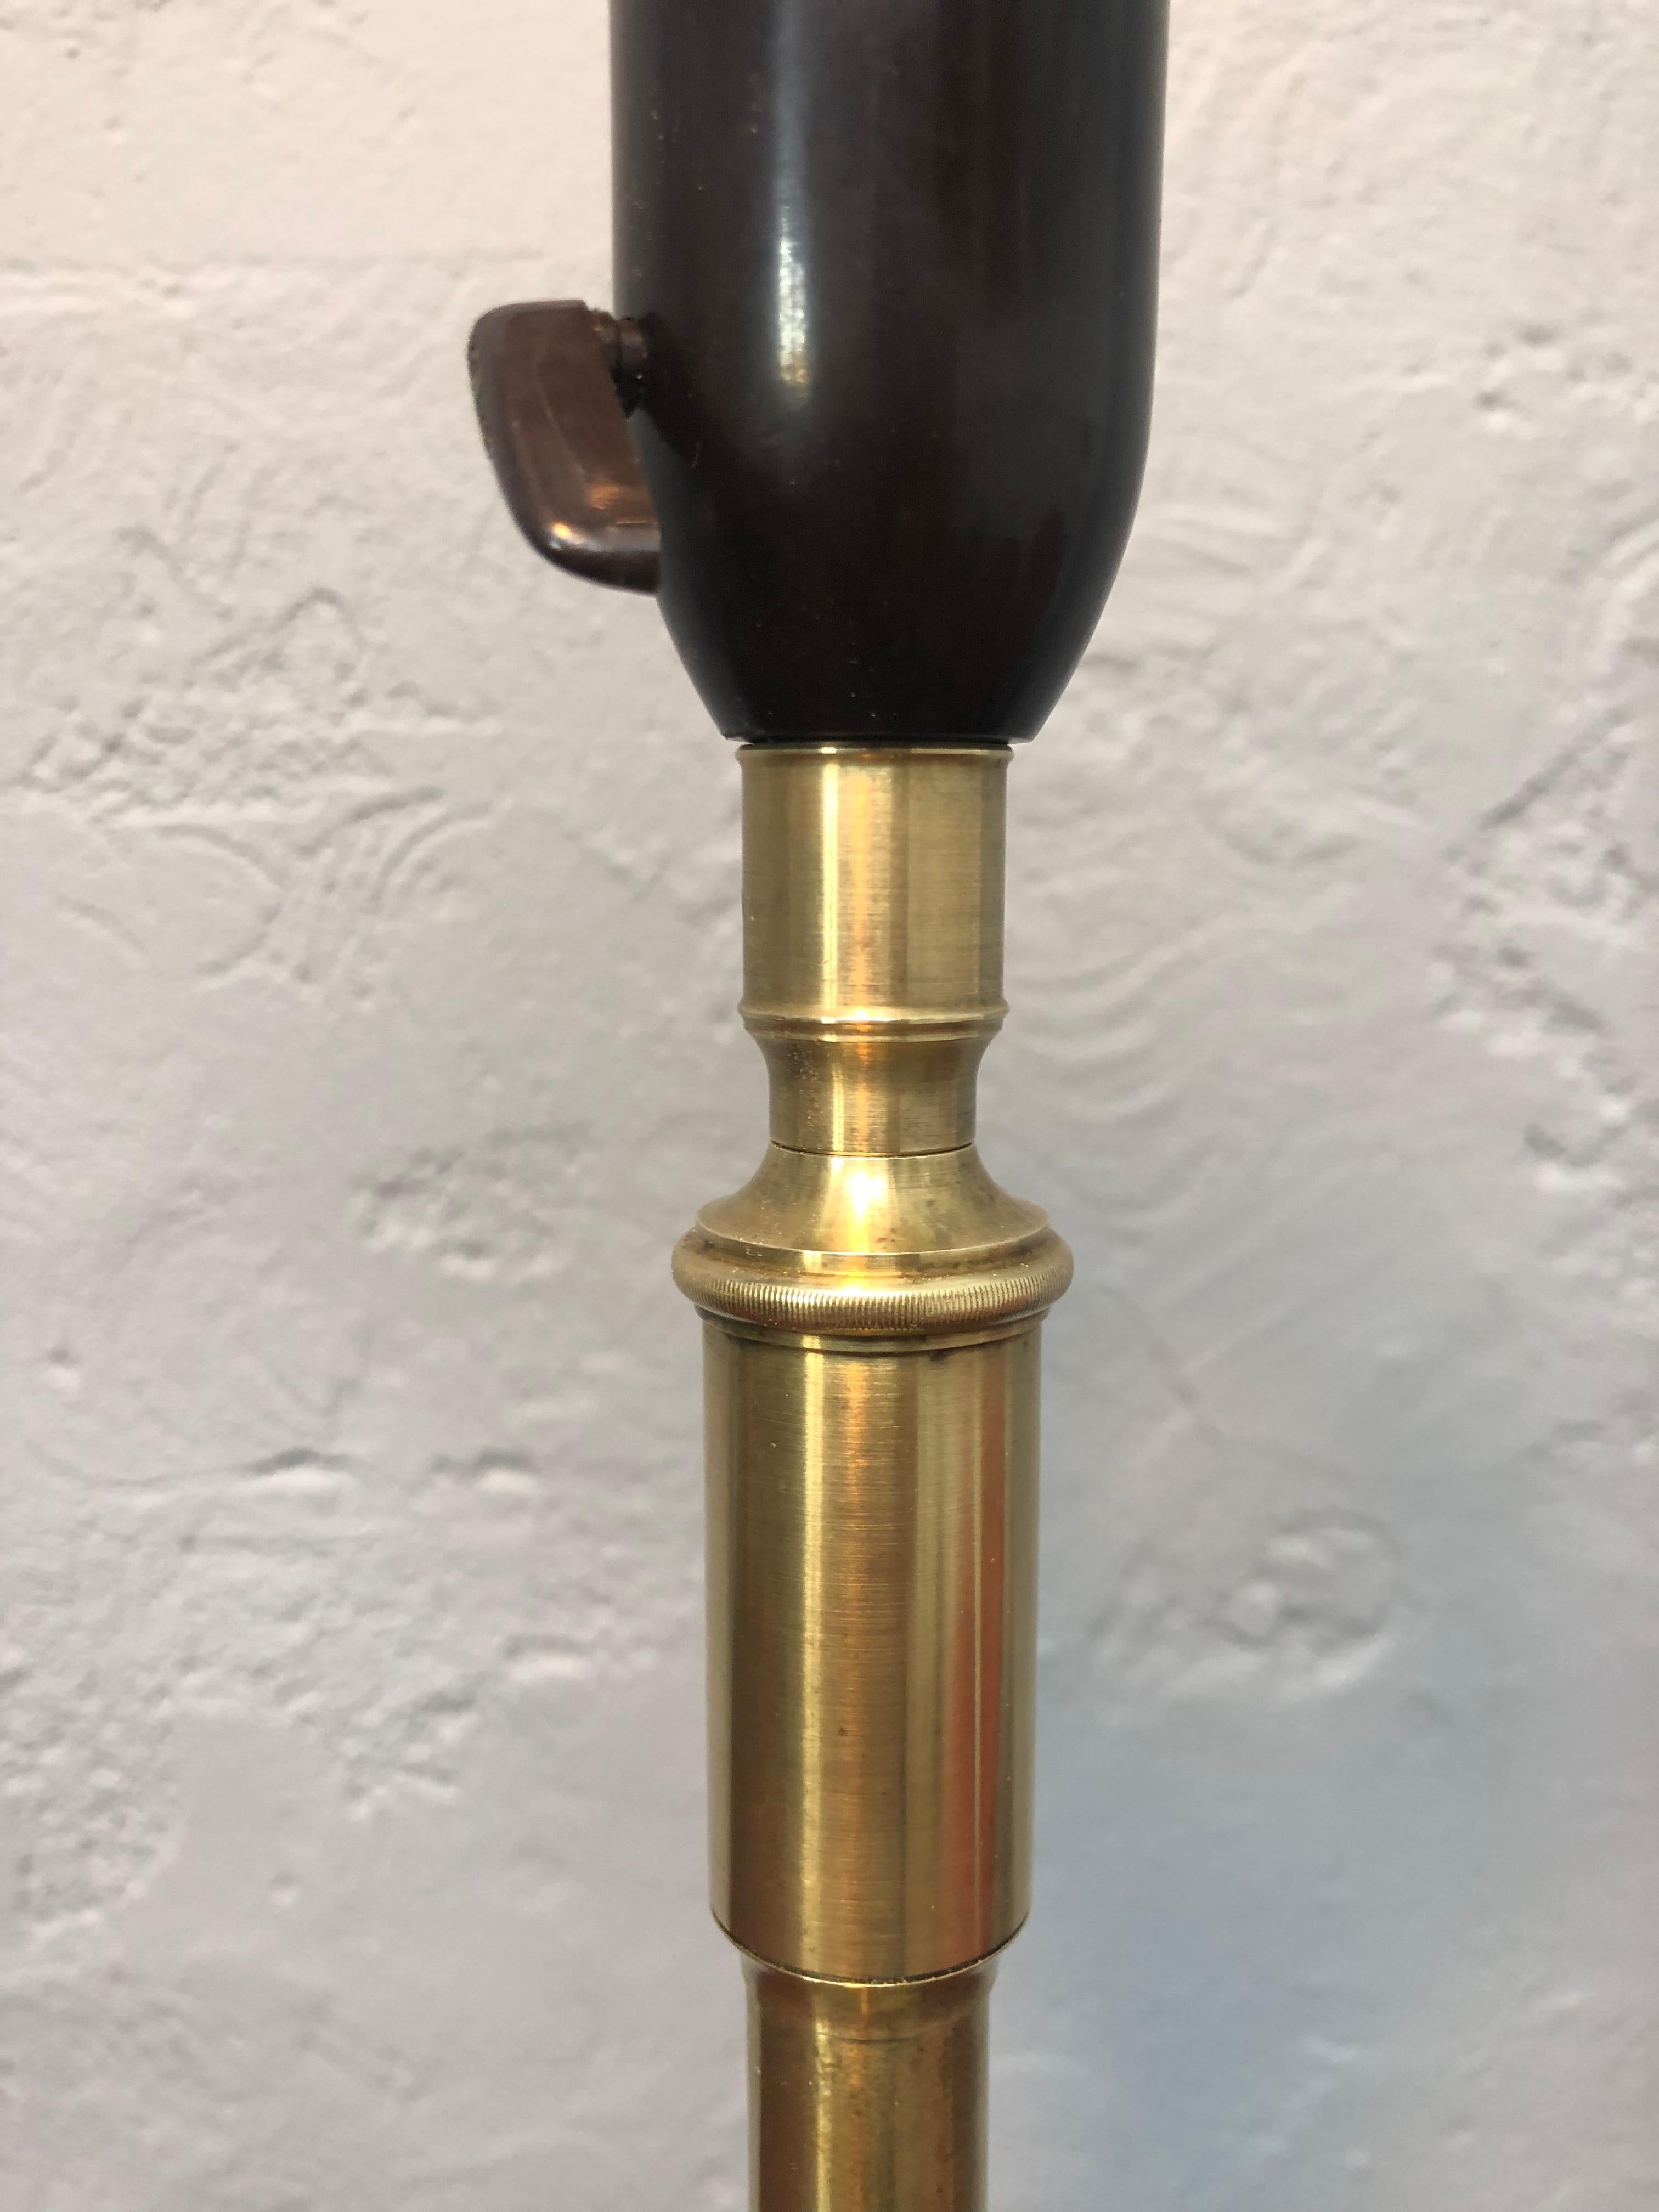 Vintage Pair of Brass Table Lamps by Esben Klint for Le Klint from the 1950s For Sale 4